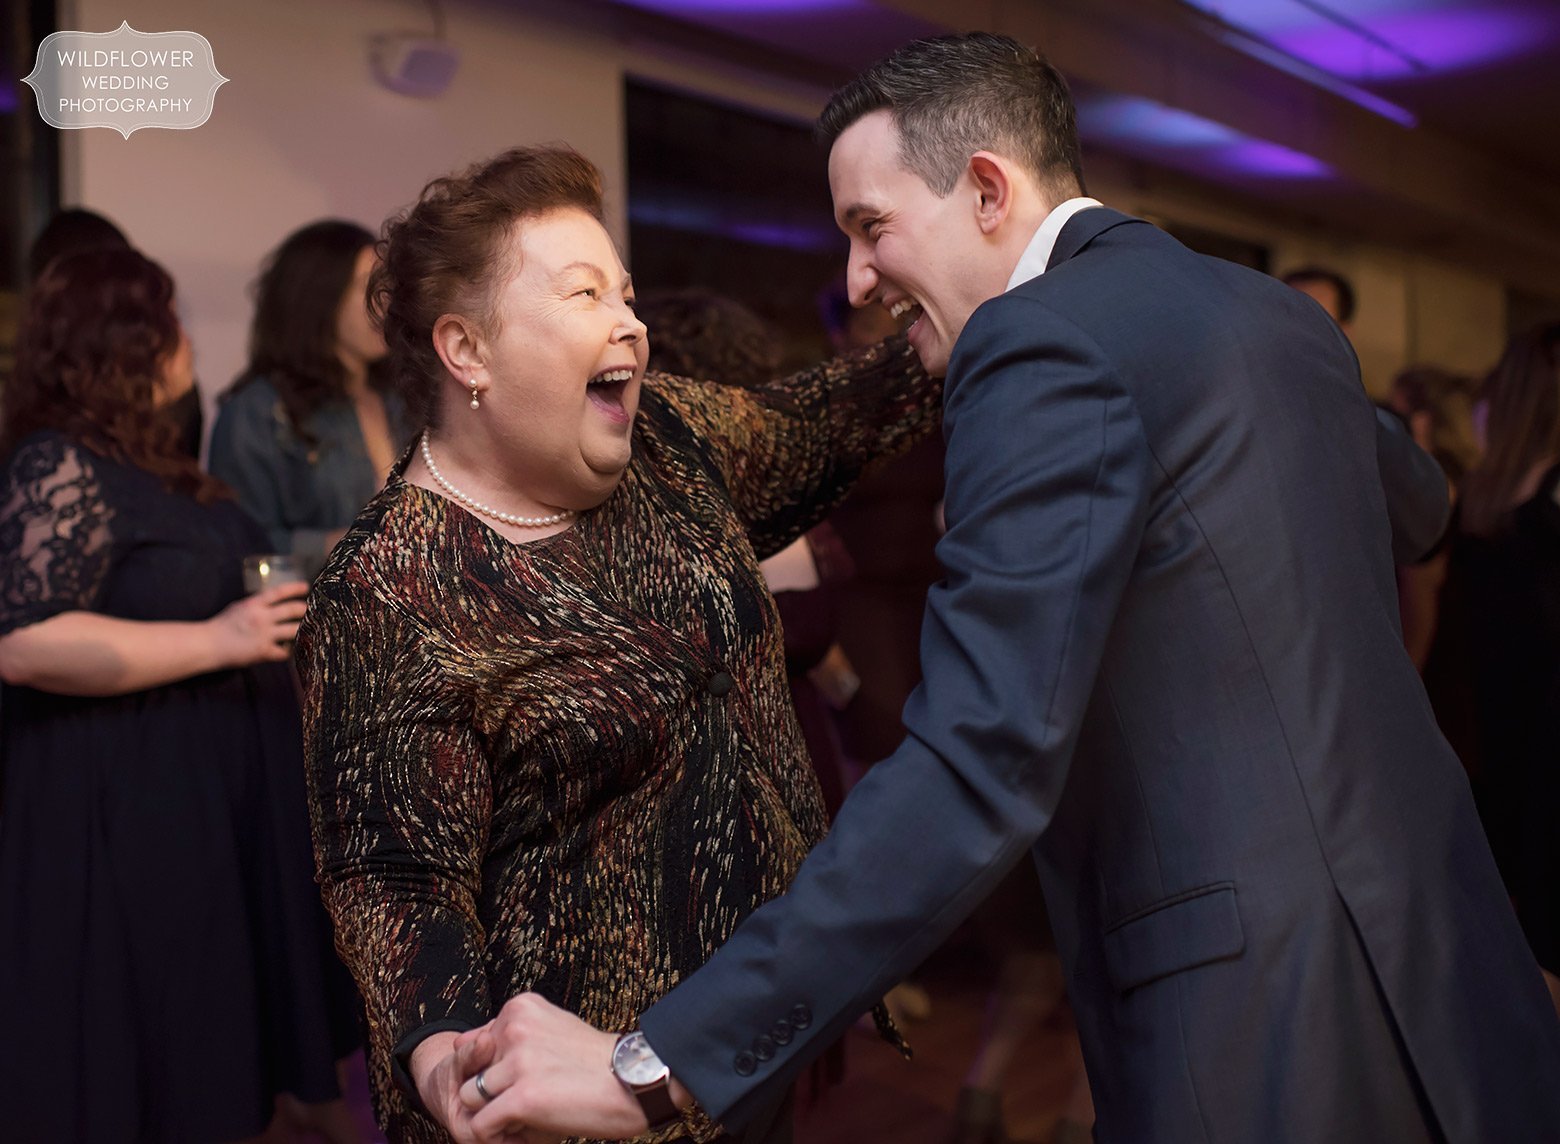 Fun dance photo of groom's mom and wedding guest at Sager Braudis.